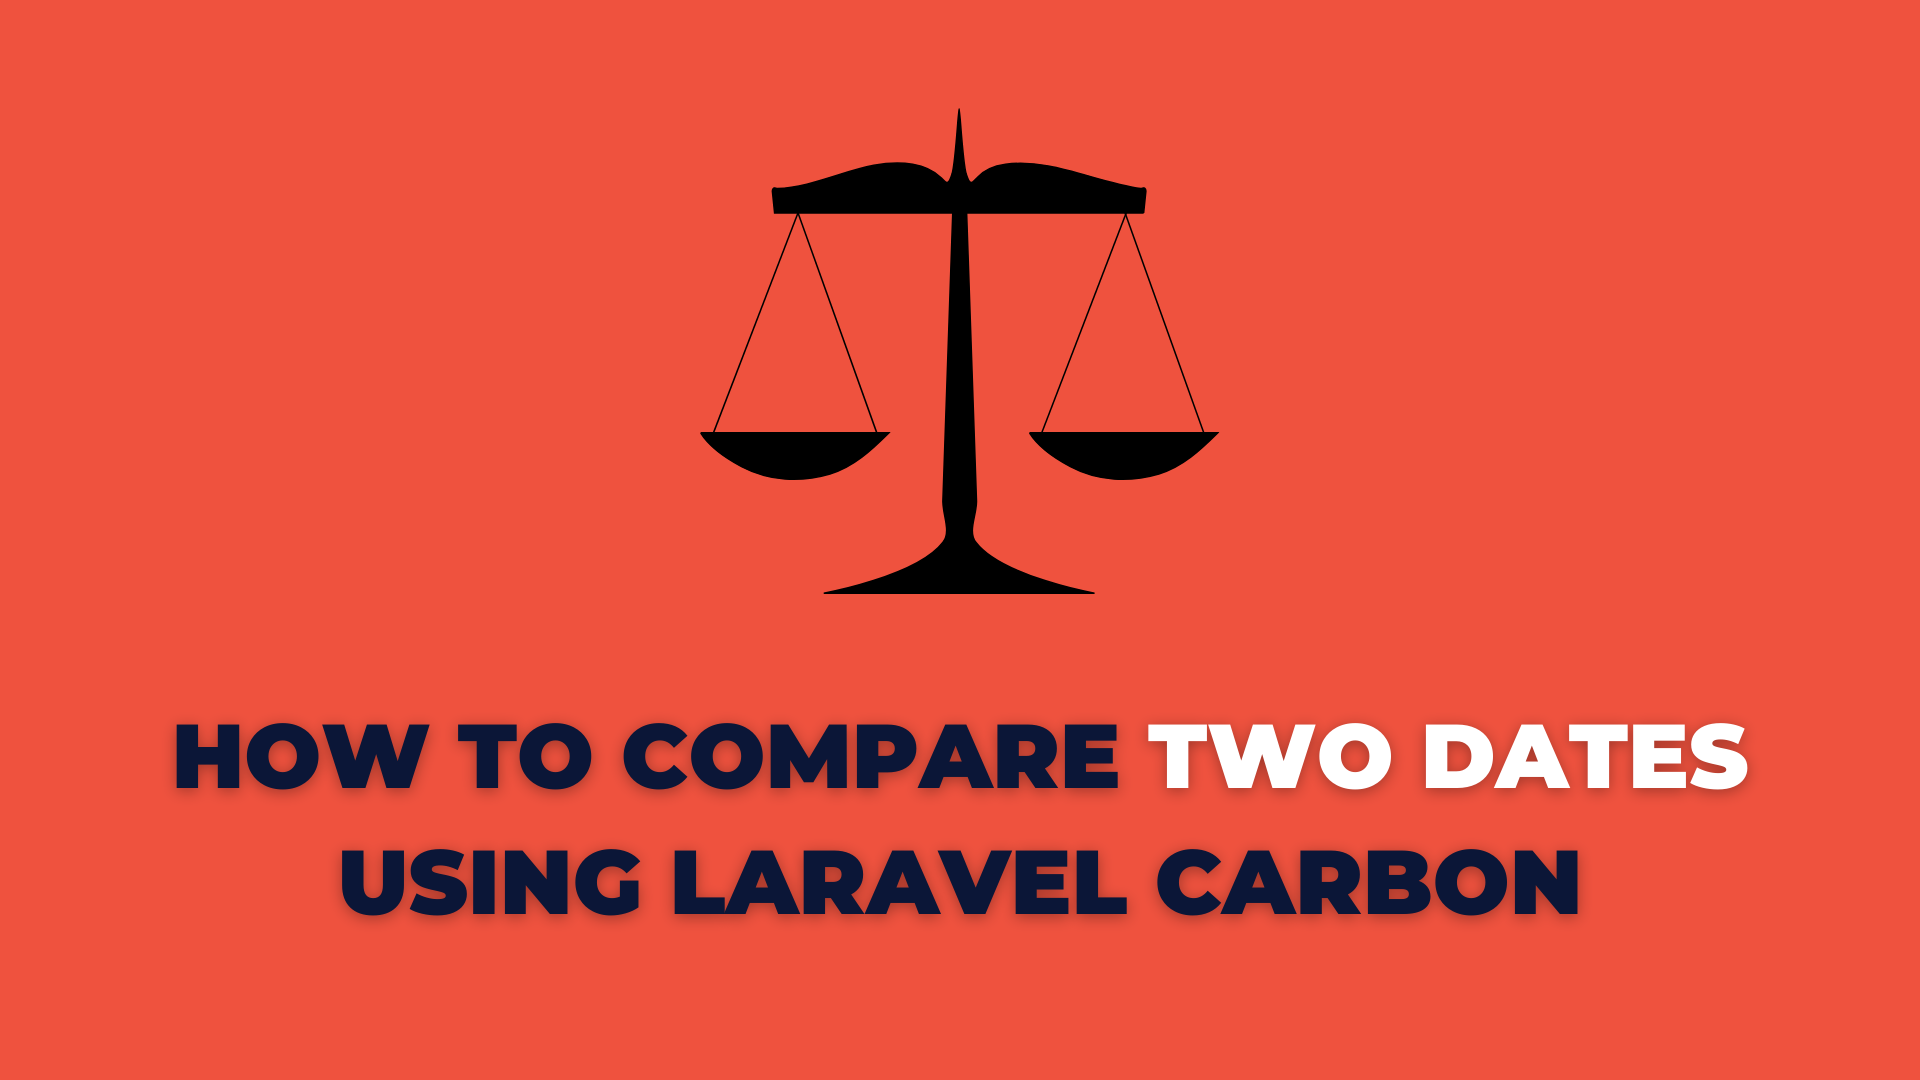 How to compare two dates using laravel carbon